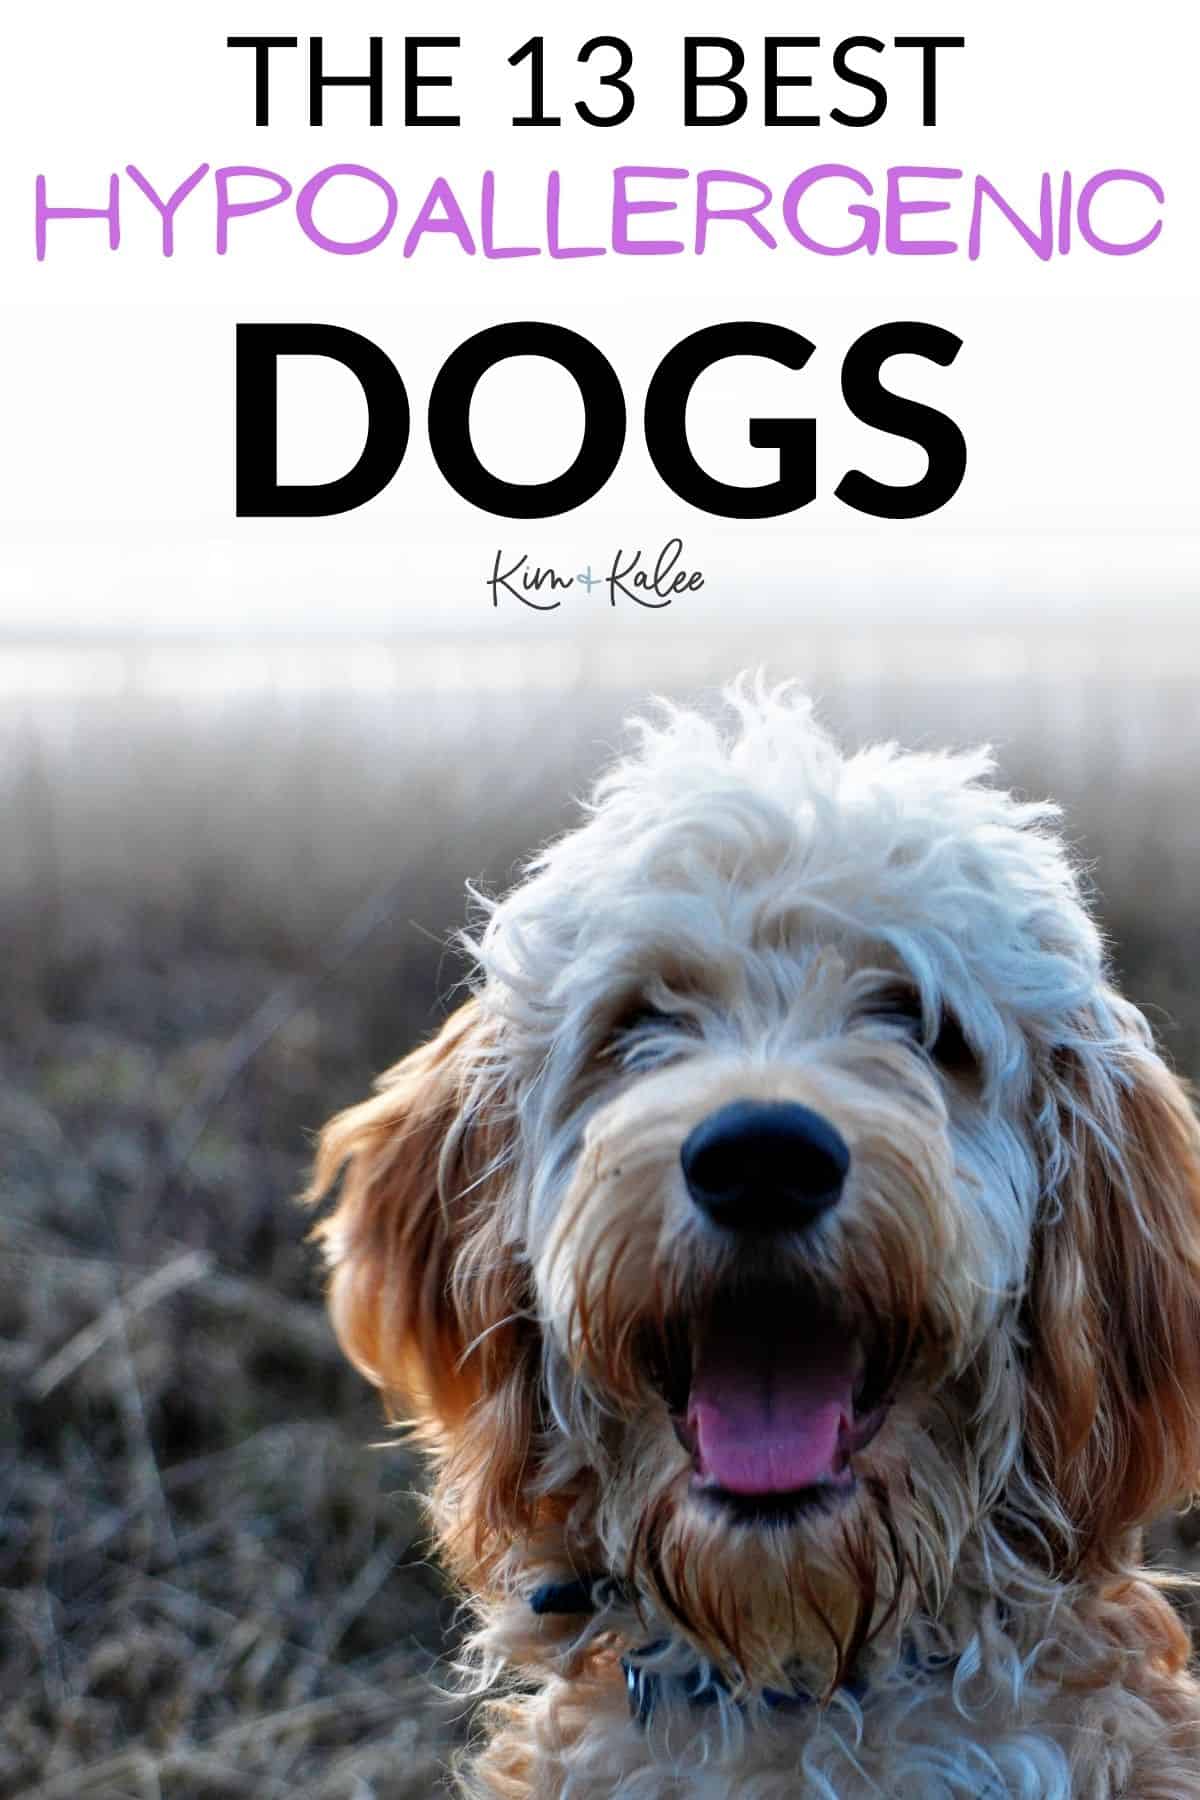 happy dog smiling with the text overlay 13 best hypoallergenic dogs